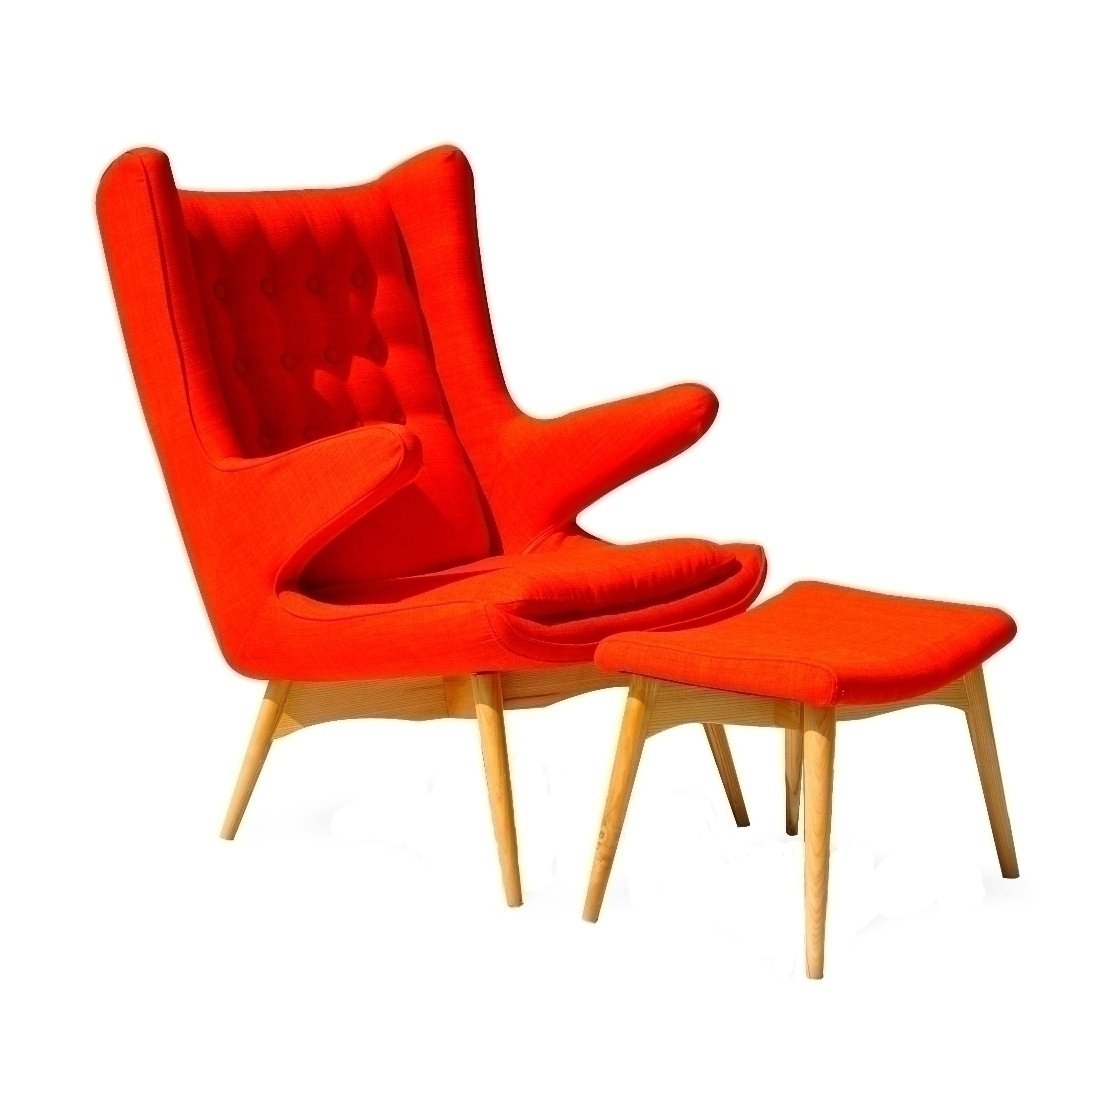 Northport Chair And Ottoman - Orange Furniture-Living Room-Ottomans & Stools